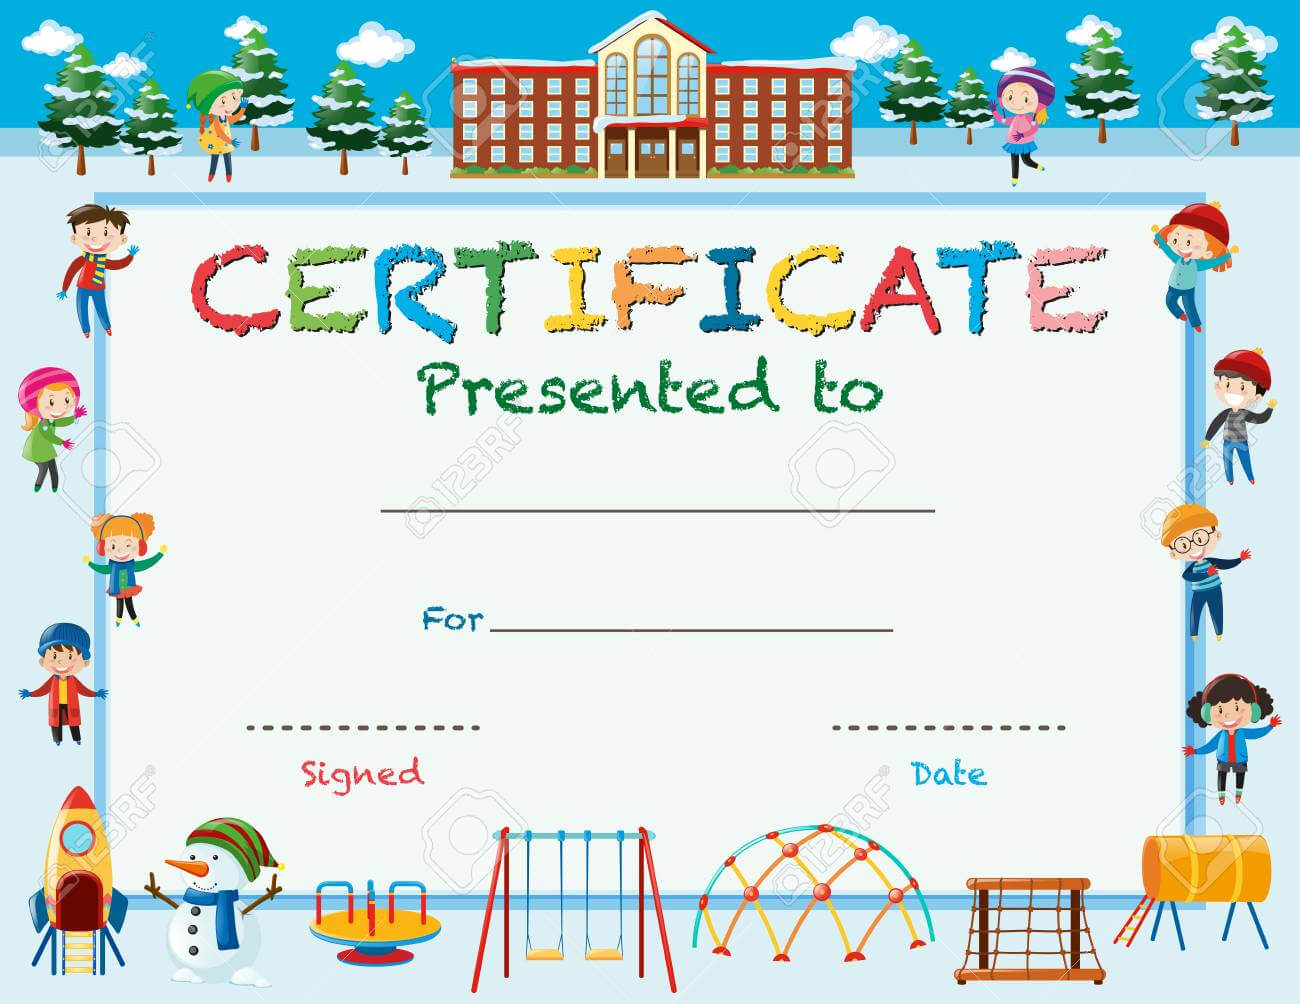 Certificate Template With Kids In Winter At School Illustration For School Certificate Templates Free